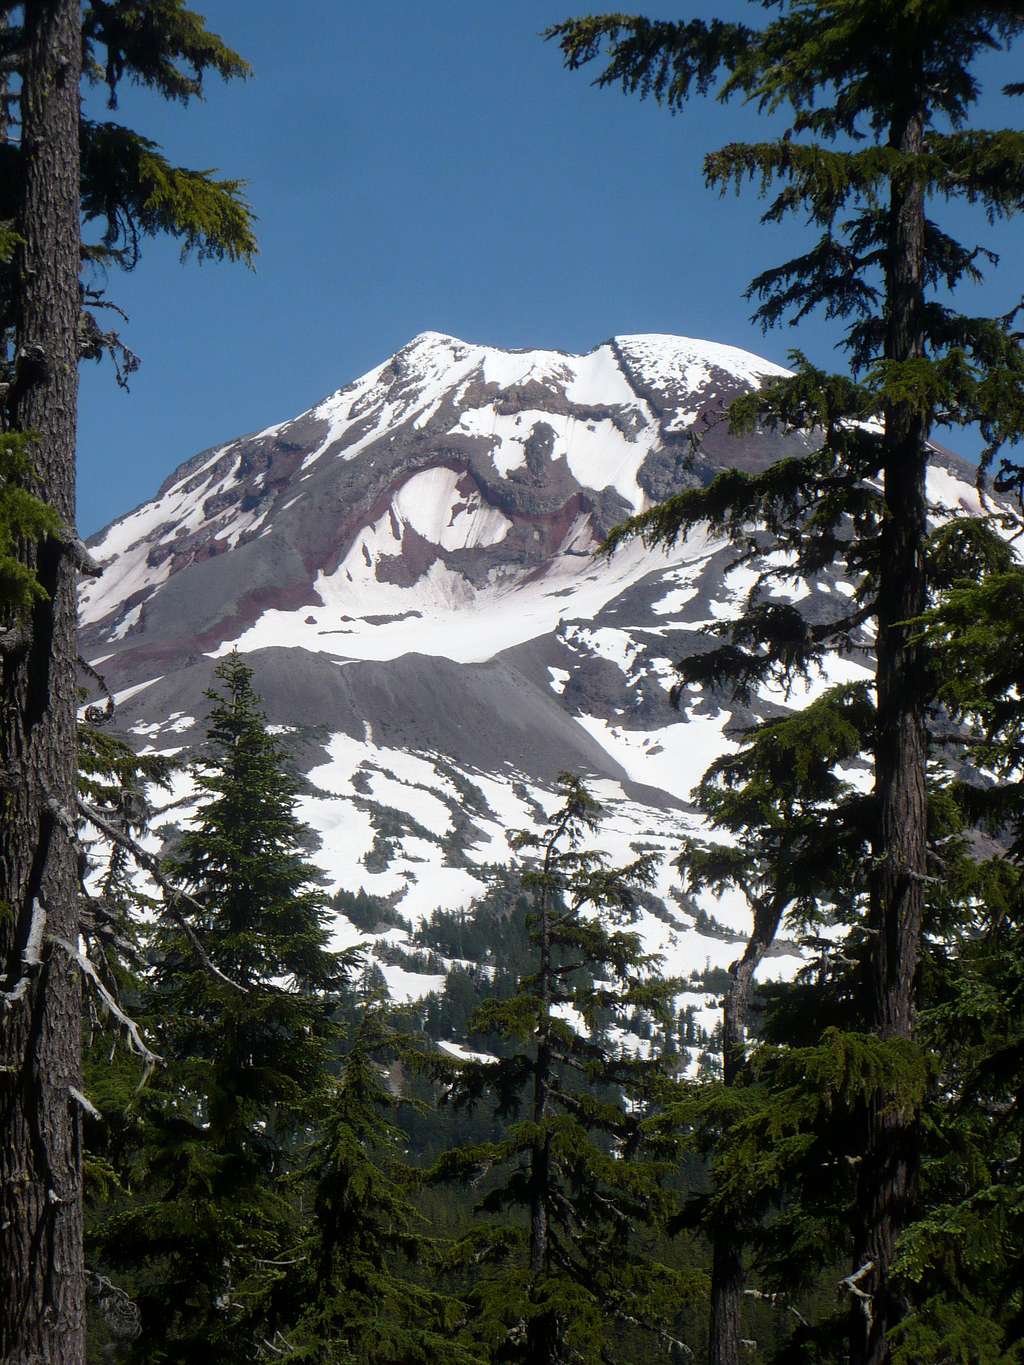 The South Sister from Foley Ridge